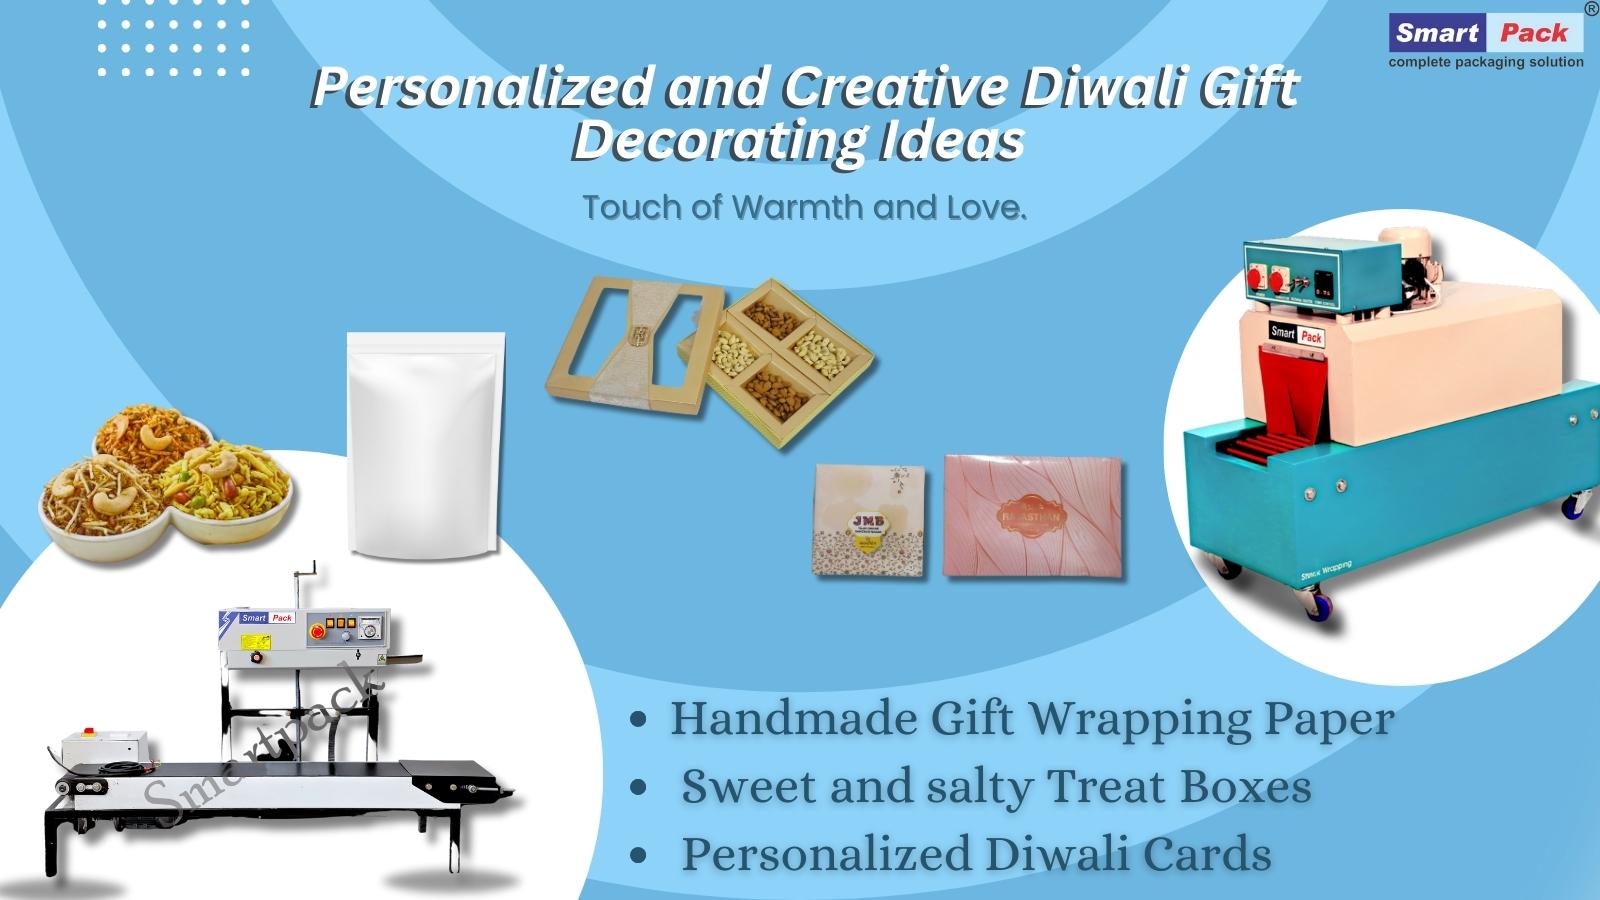 Personalized and Creative Diwali Gift Decorating Ideas: Adding a Touch of Warmth and Love